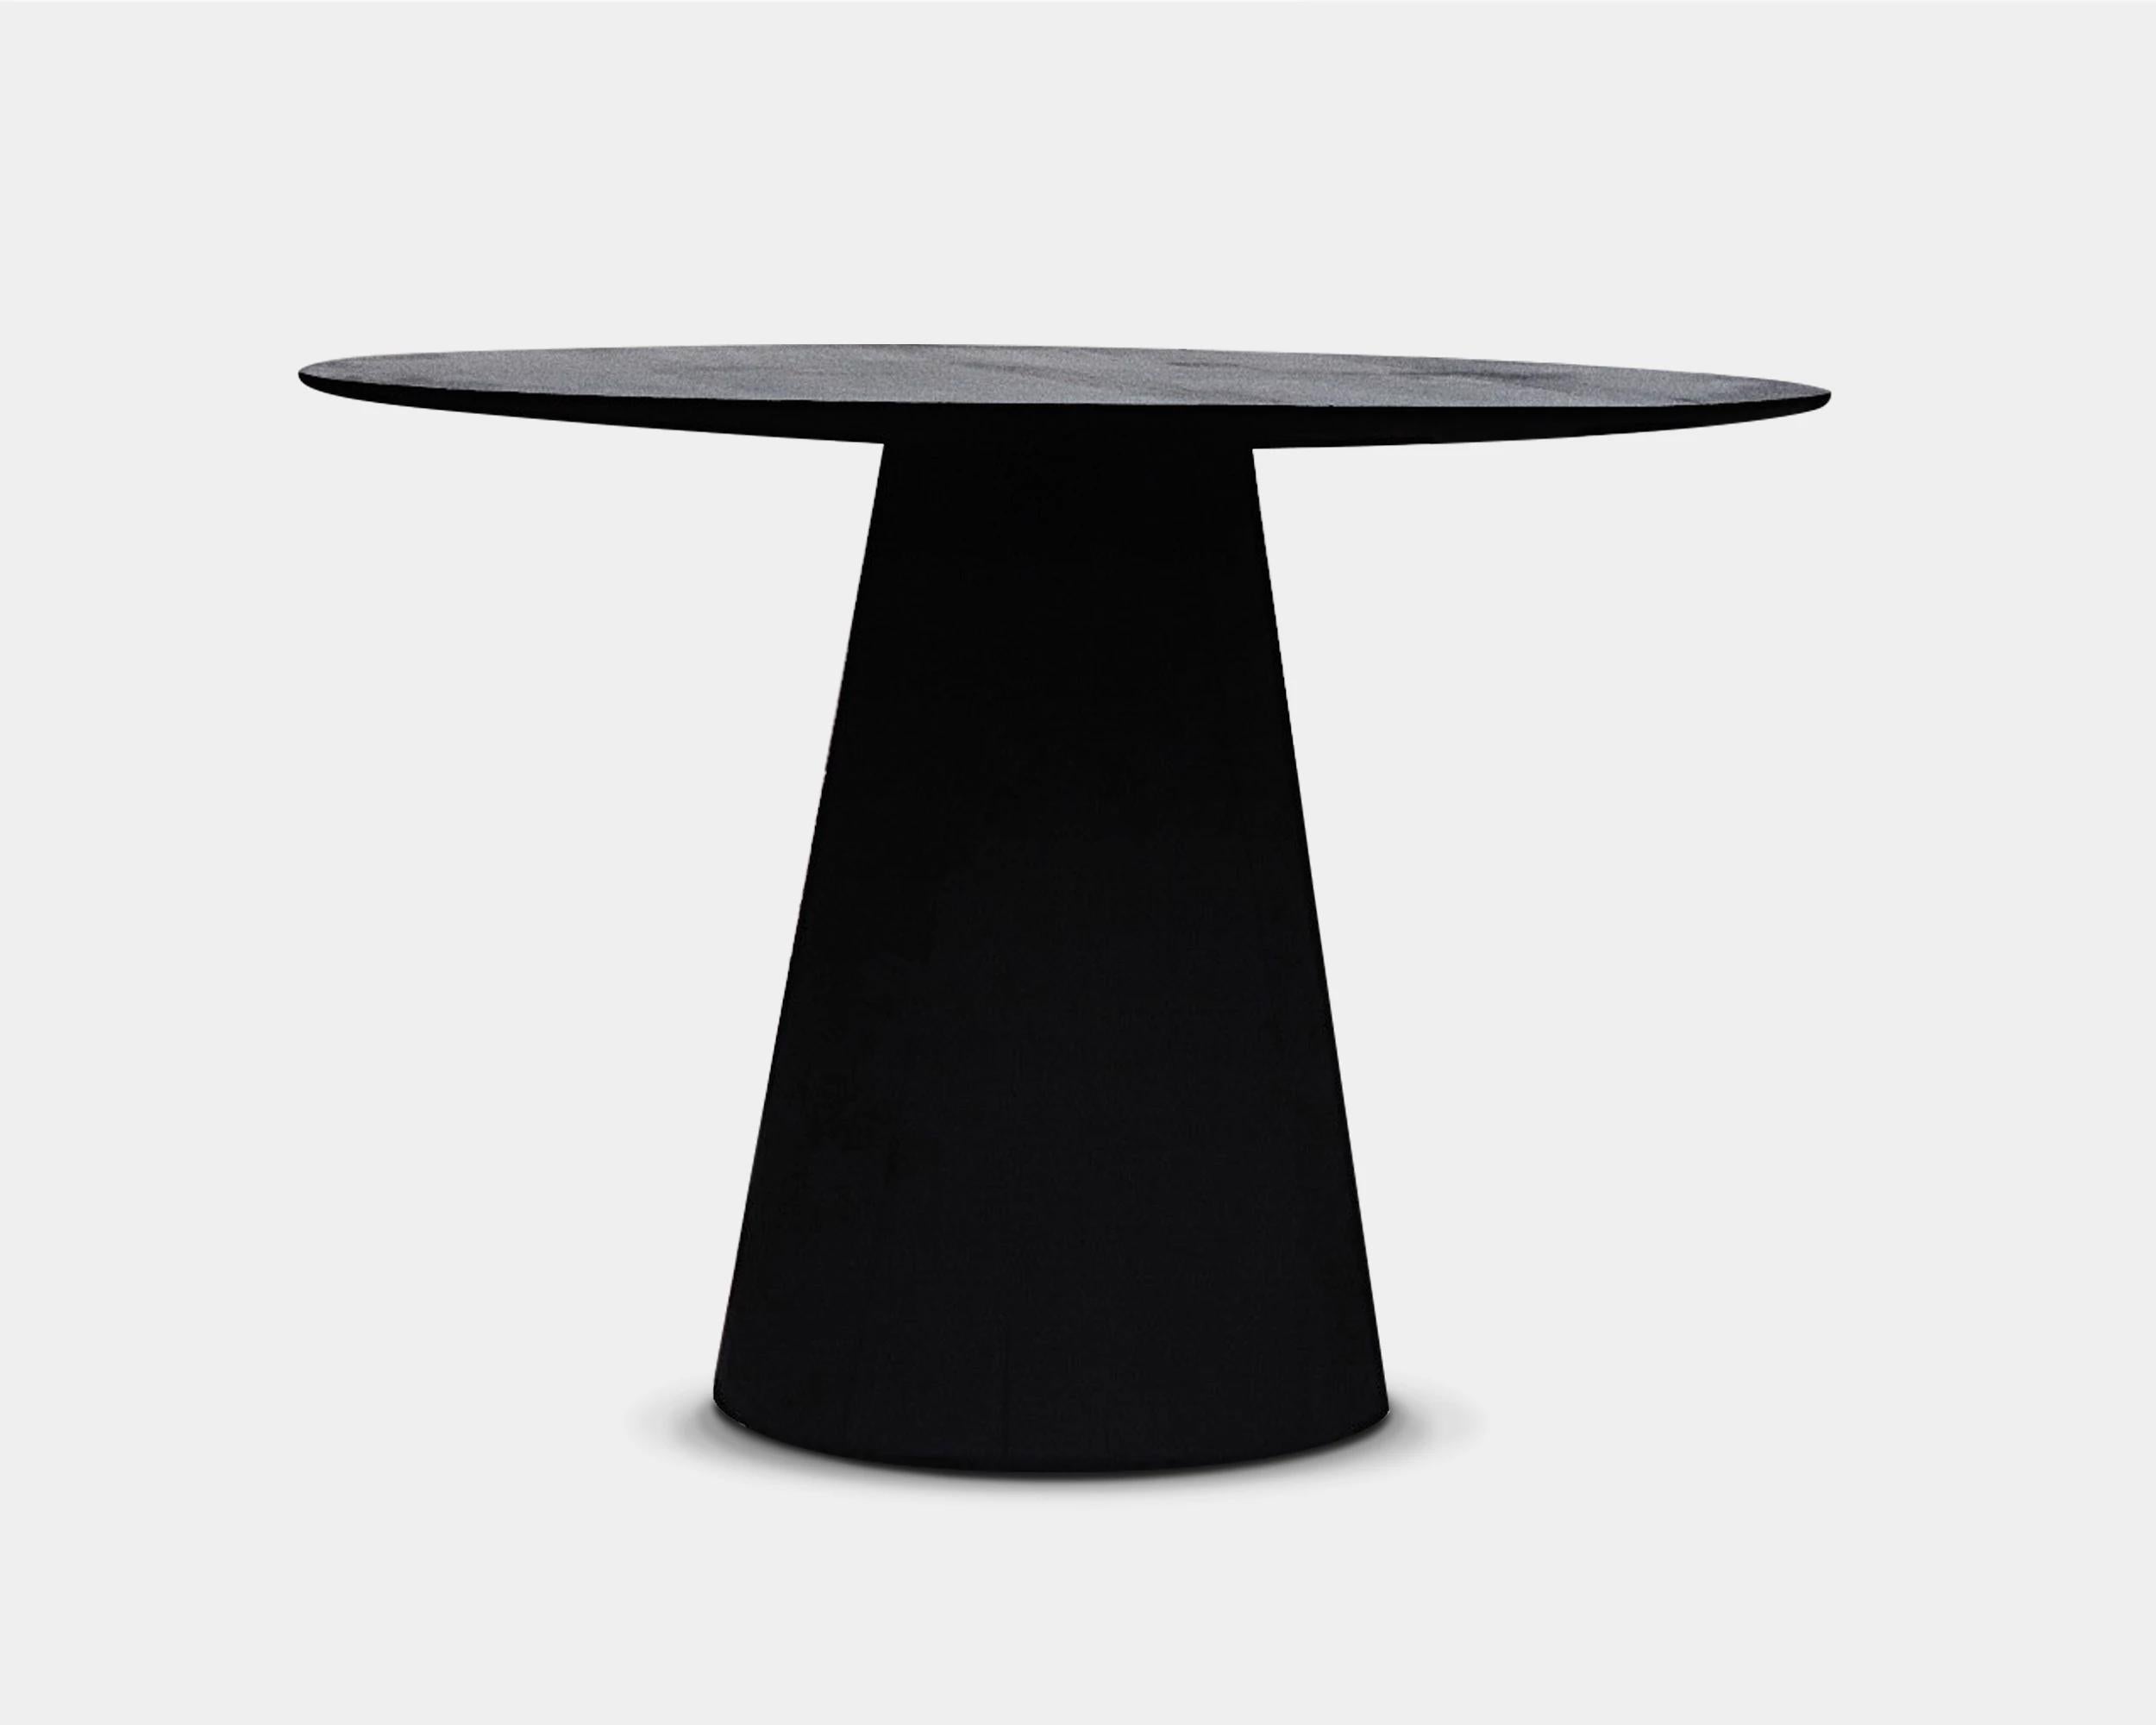 Customizable round dining table AMOK by Camilo Andres Rodriguez Marquez (aka CarmWorks)

Solid oak or cedar / Burnt wood or natural 
Standard size: H76 x 100 cm (customizable) 

Each piece is made to order and hand crafted by the artist.